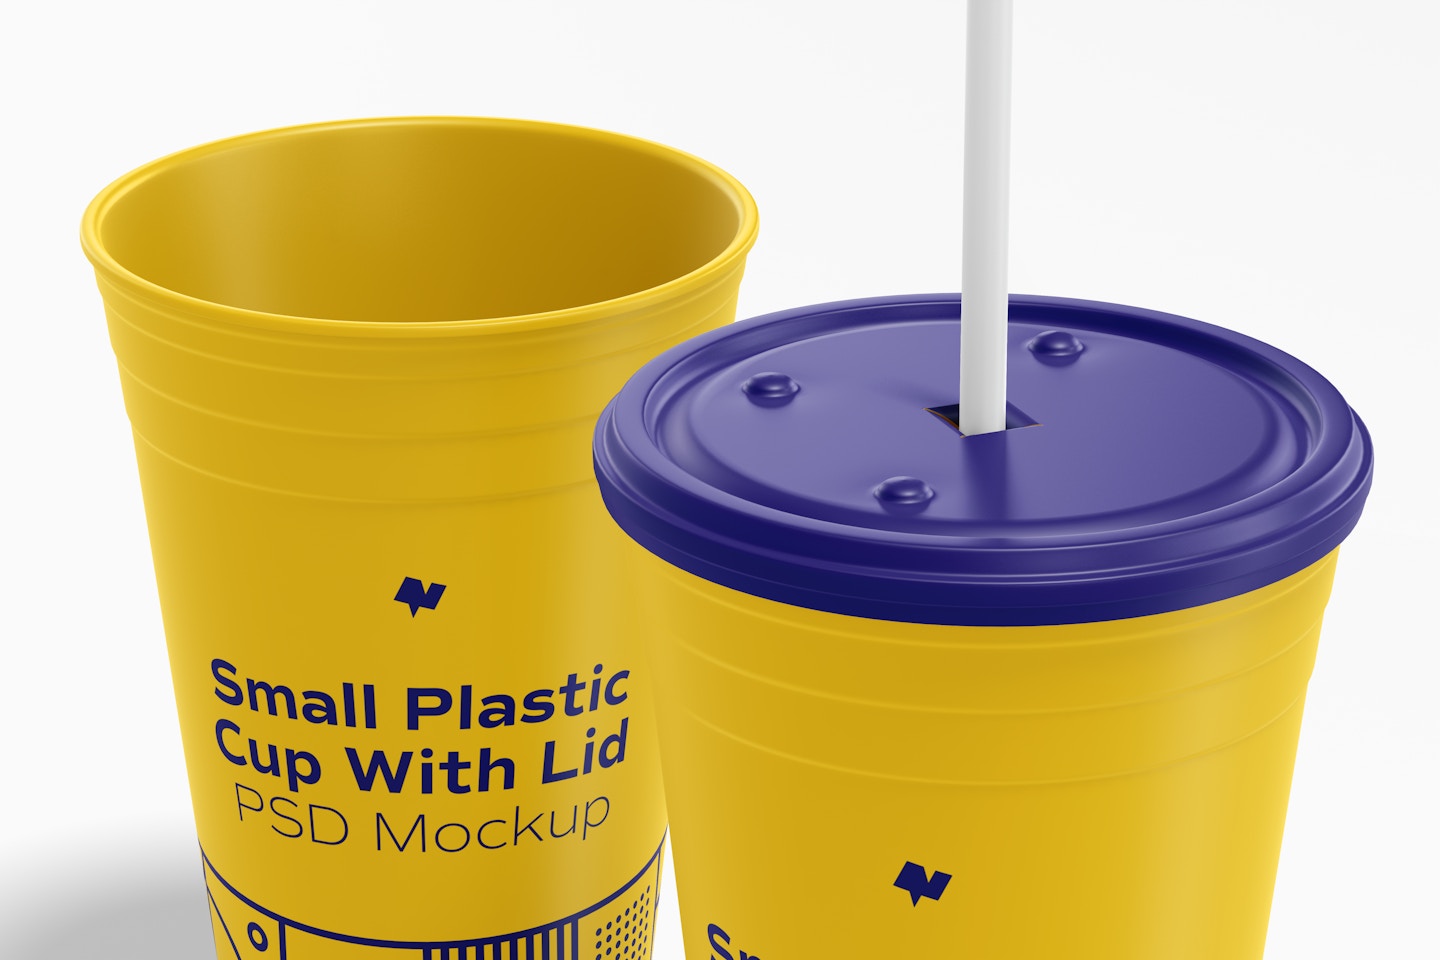 Small Plastic Cup with Lid Mockup, Close Up